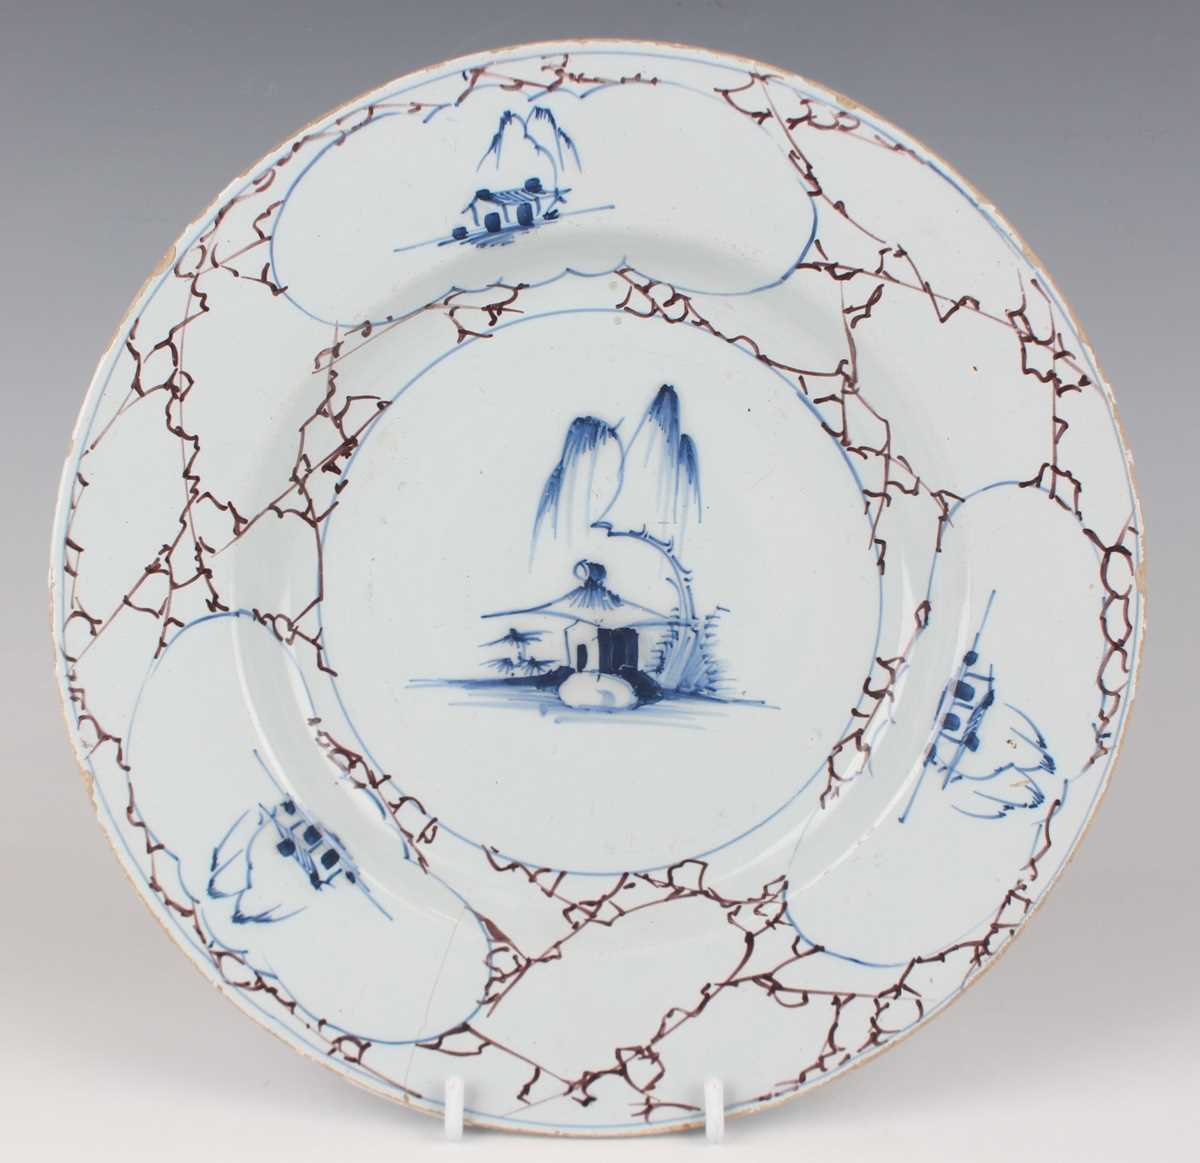 An English delft plate, Lambeth, circa 1770-85, painted in blue, green and manganese with a windmill - Image 15 of 23